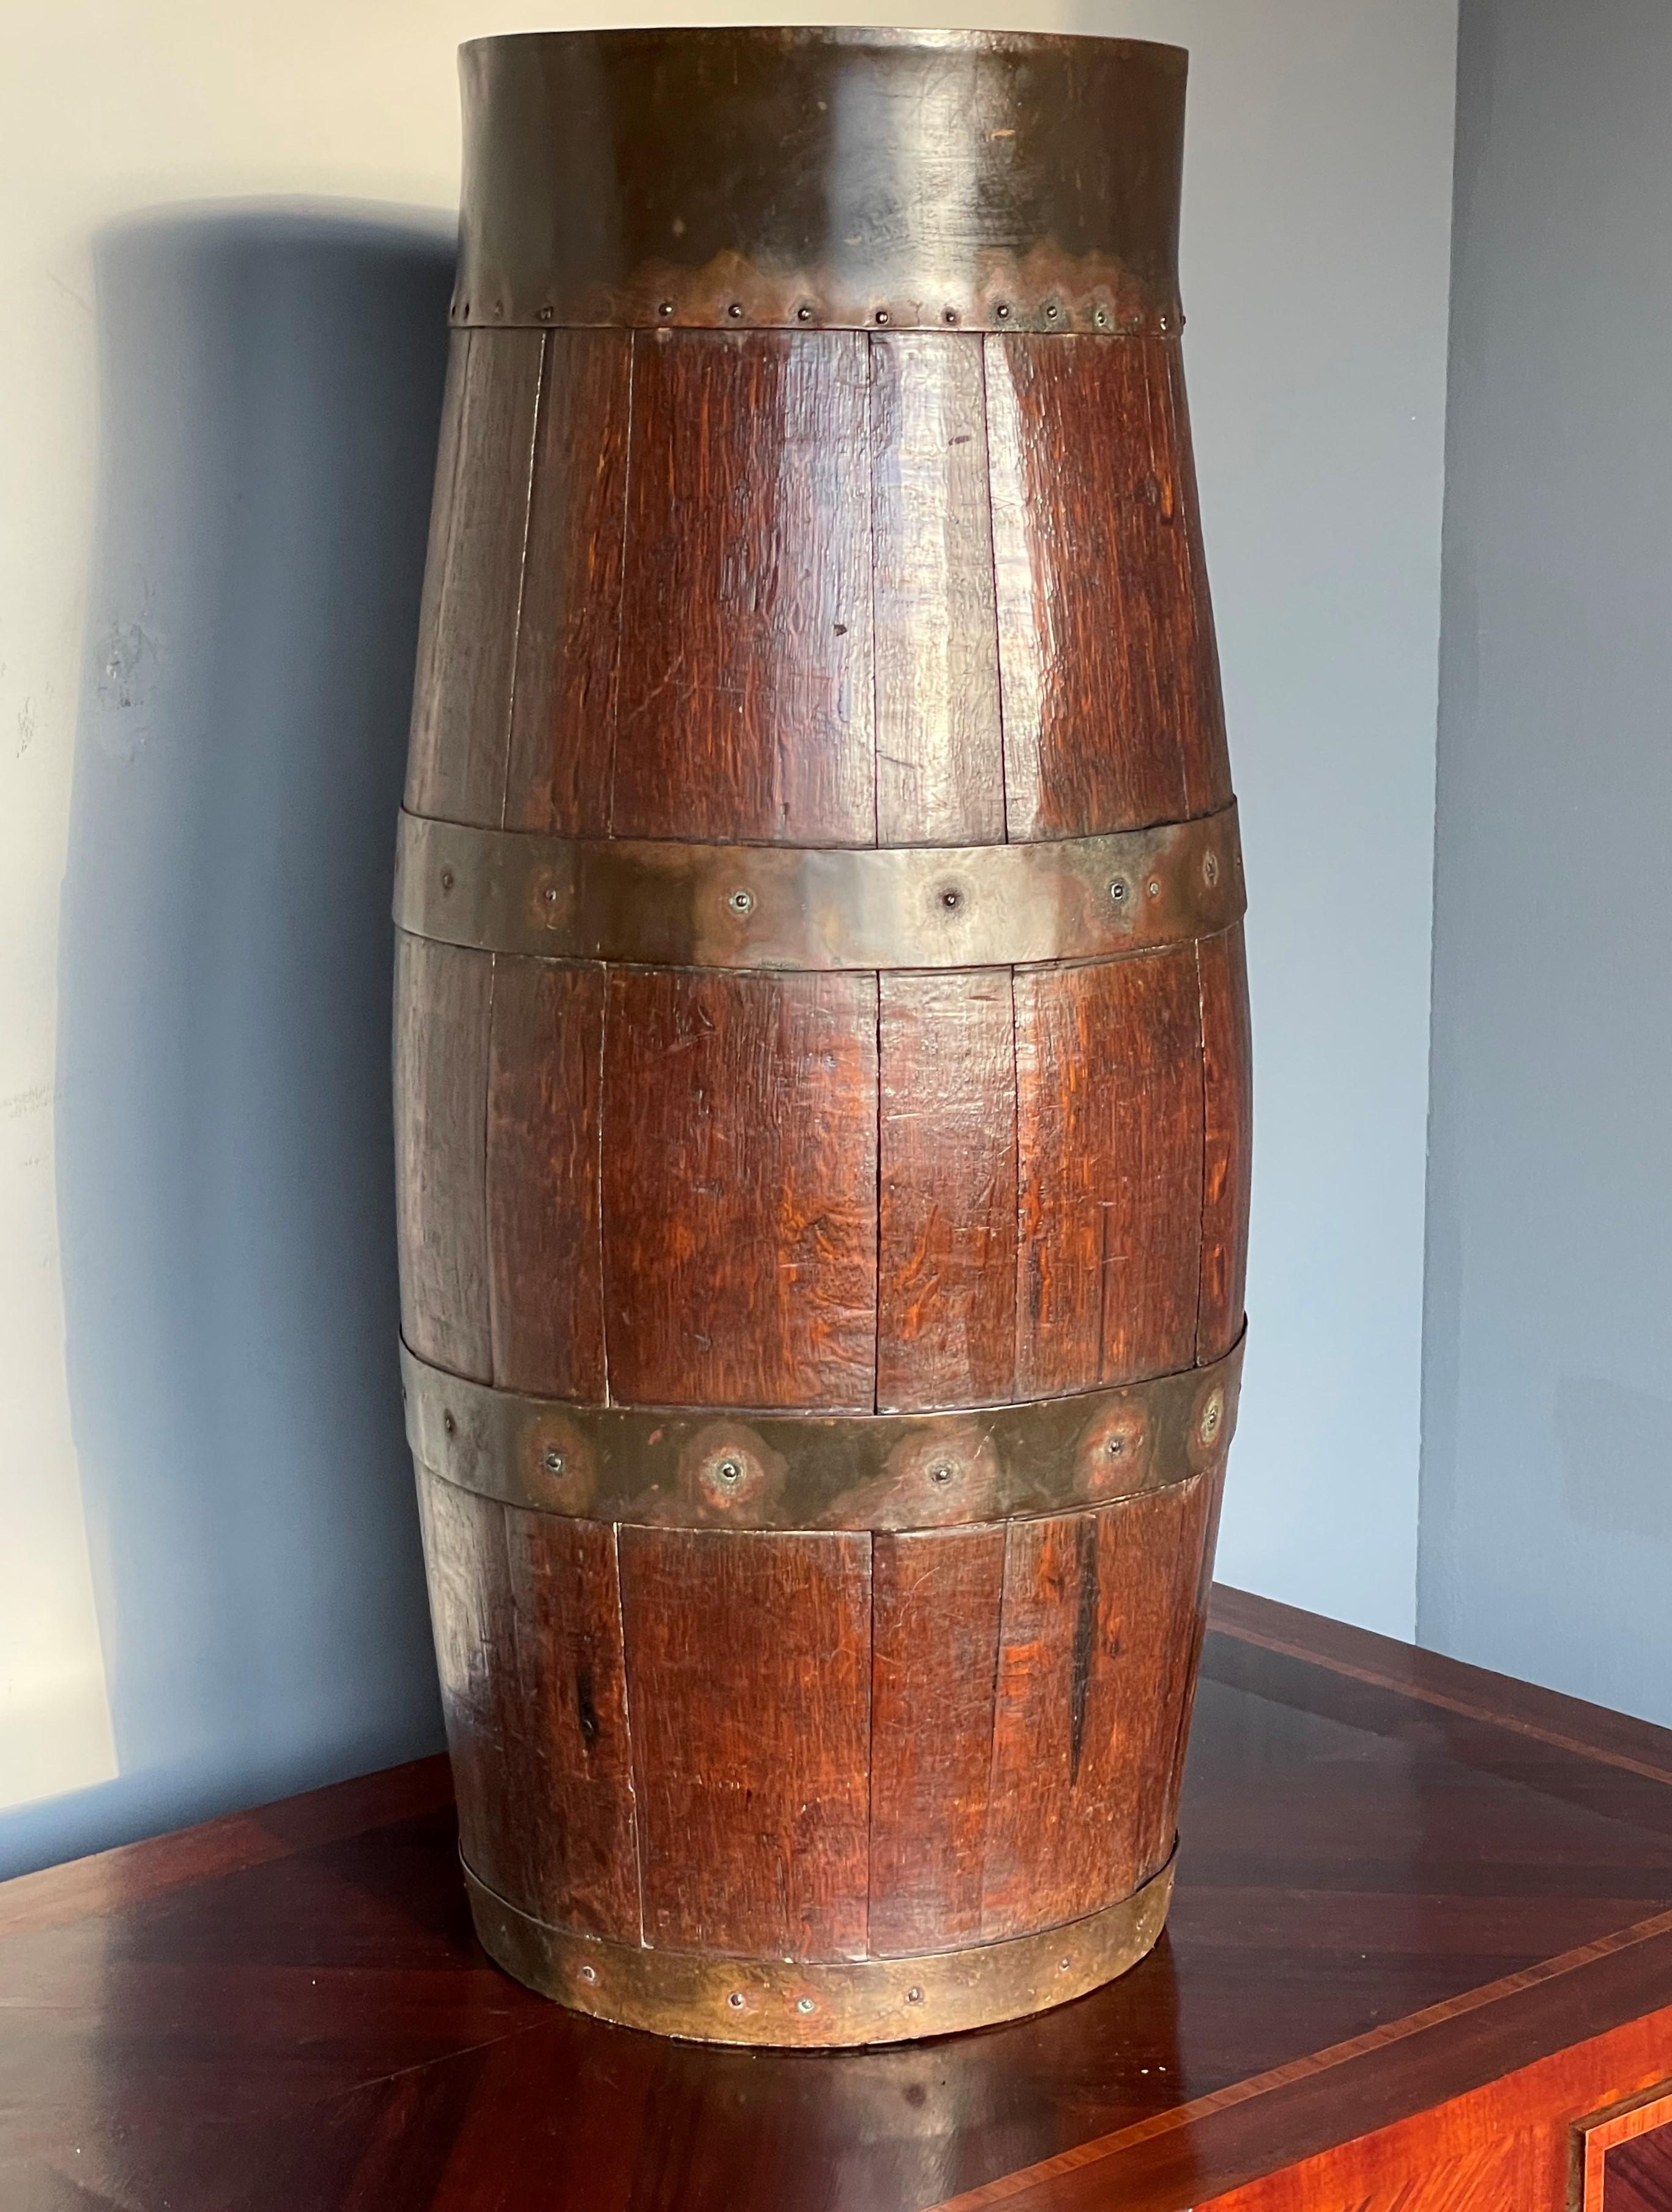 Great quality, condition and patina.

The condition of this handcrafted, barrel shaped umbrella or stick stand is right up there with the best. It is made of solid, stained tiger oak only and the curved oak parts that together make the barrel are